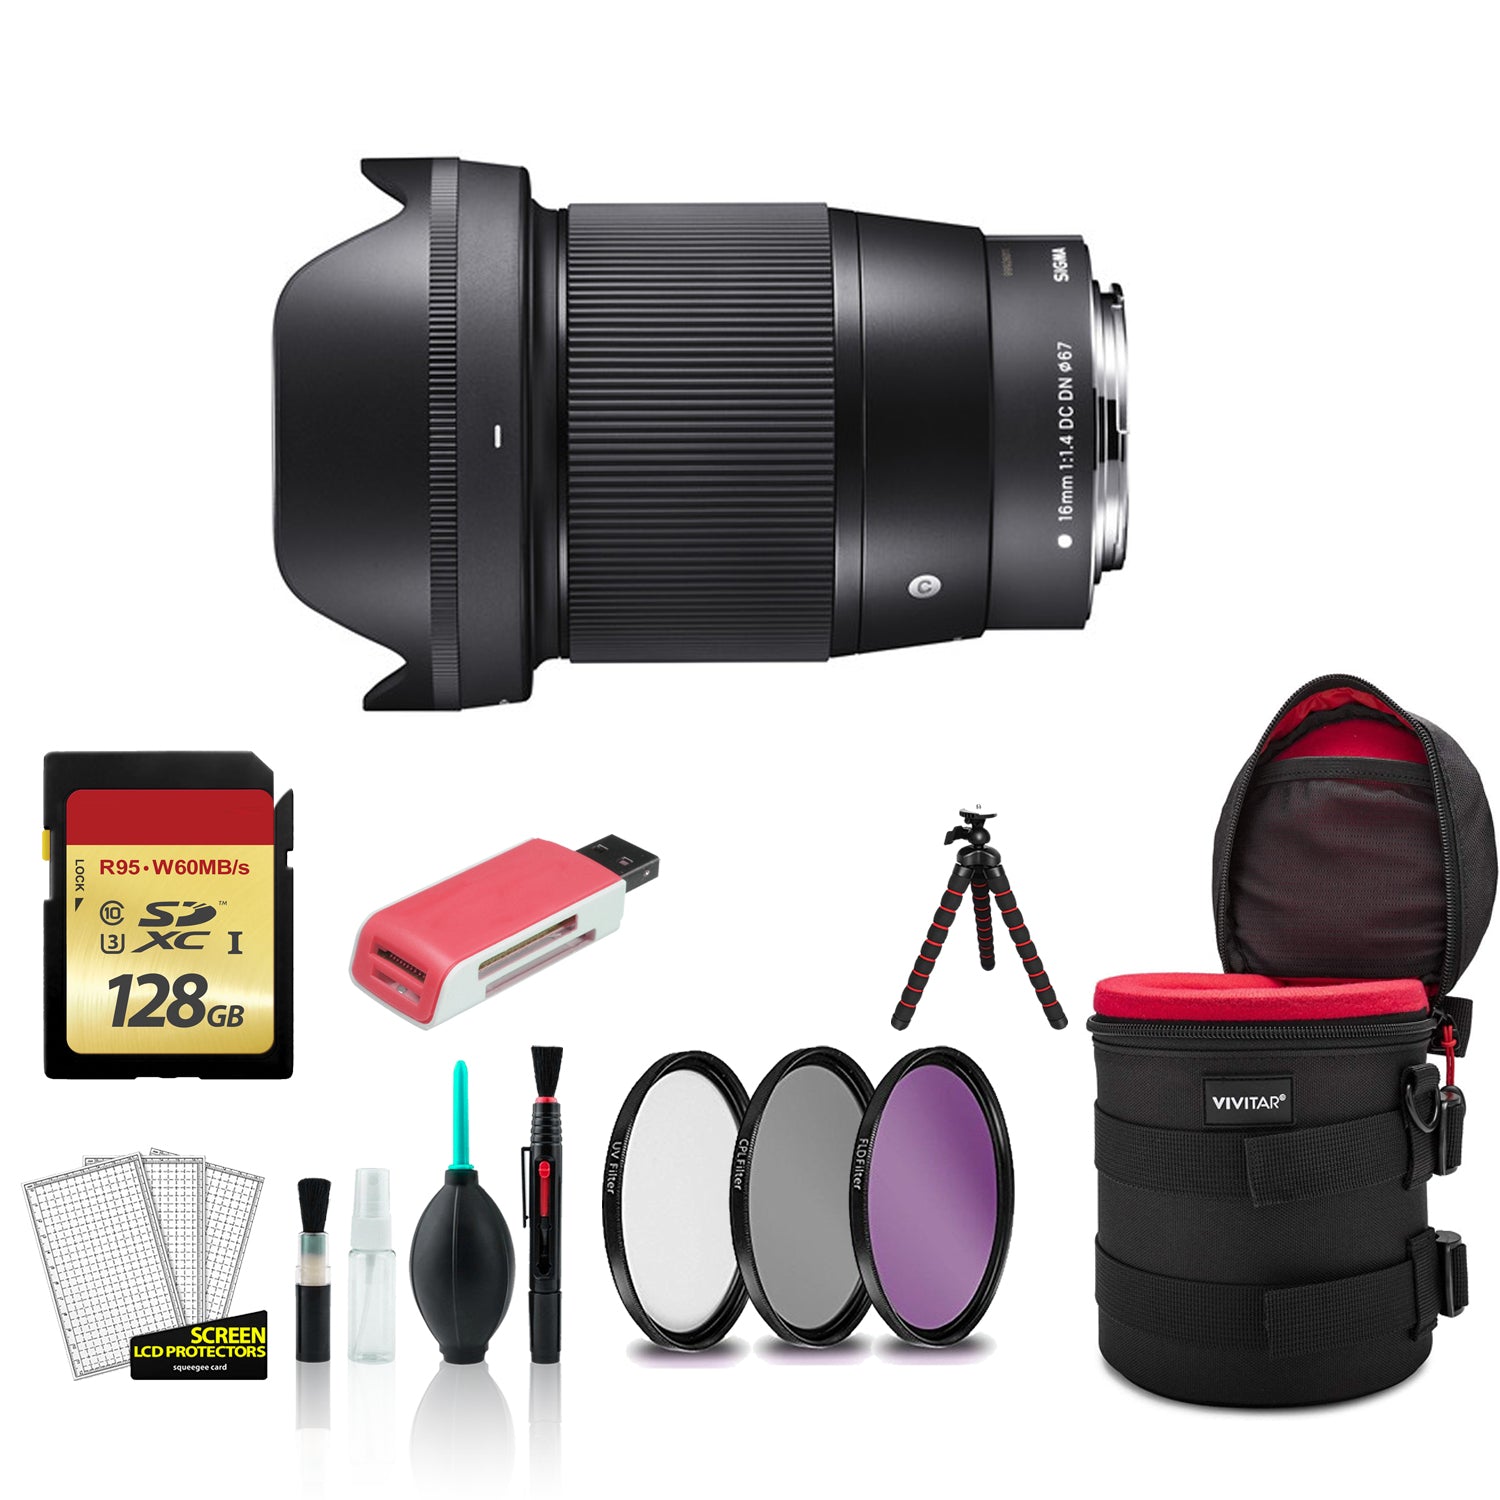 Sigma 16mm Contemporary Lens f/1.4 DC DN for Micro Four Thirds 402963 with 128GB Memory Card + Padded Case Bundle